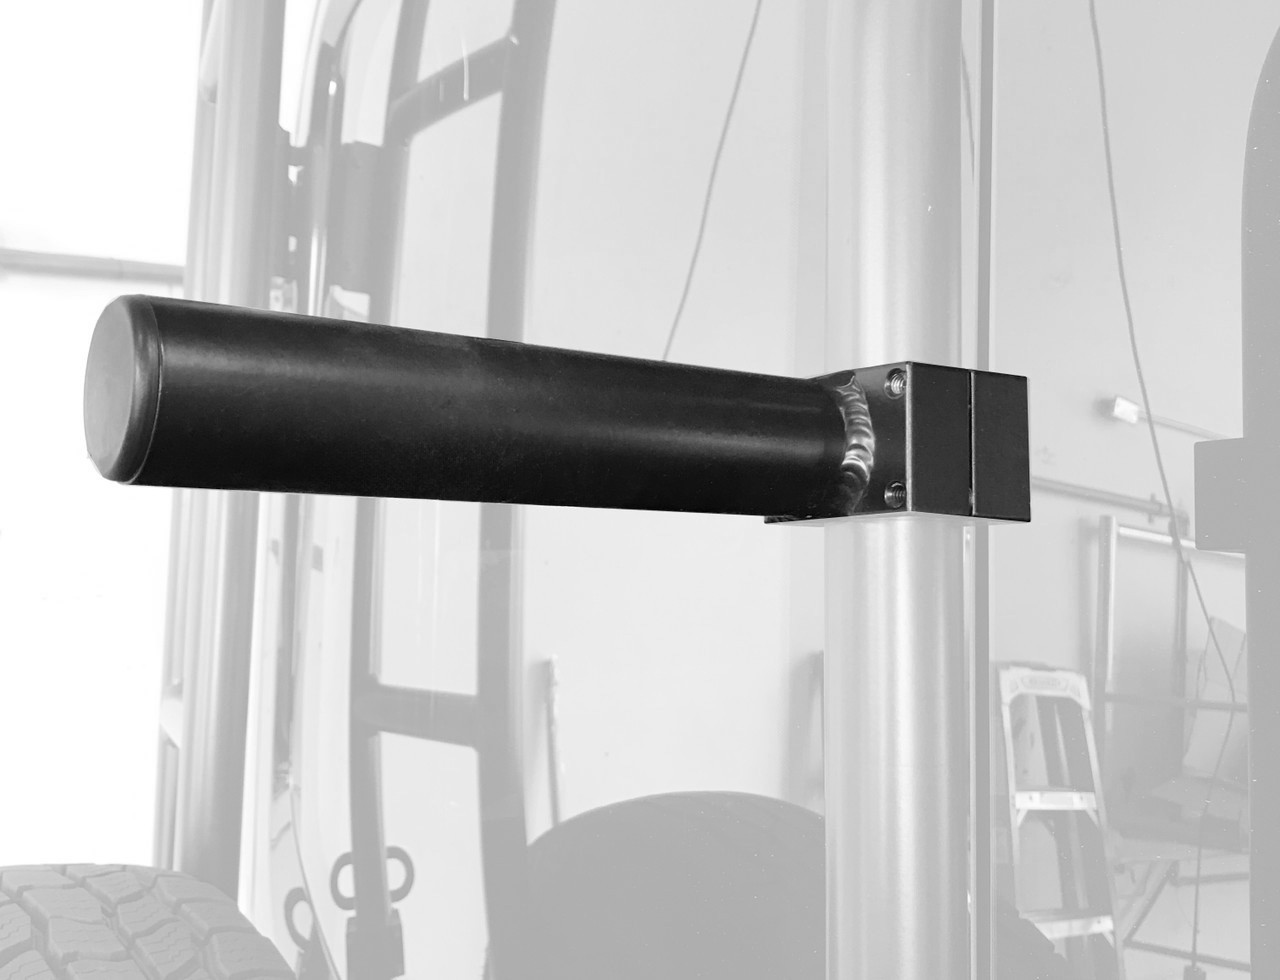 Image featuring Rear Door Rack Bolt-On Support Posts with a blurry background.